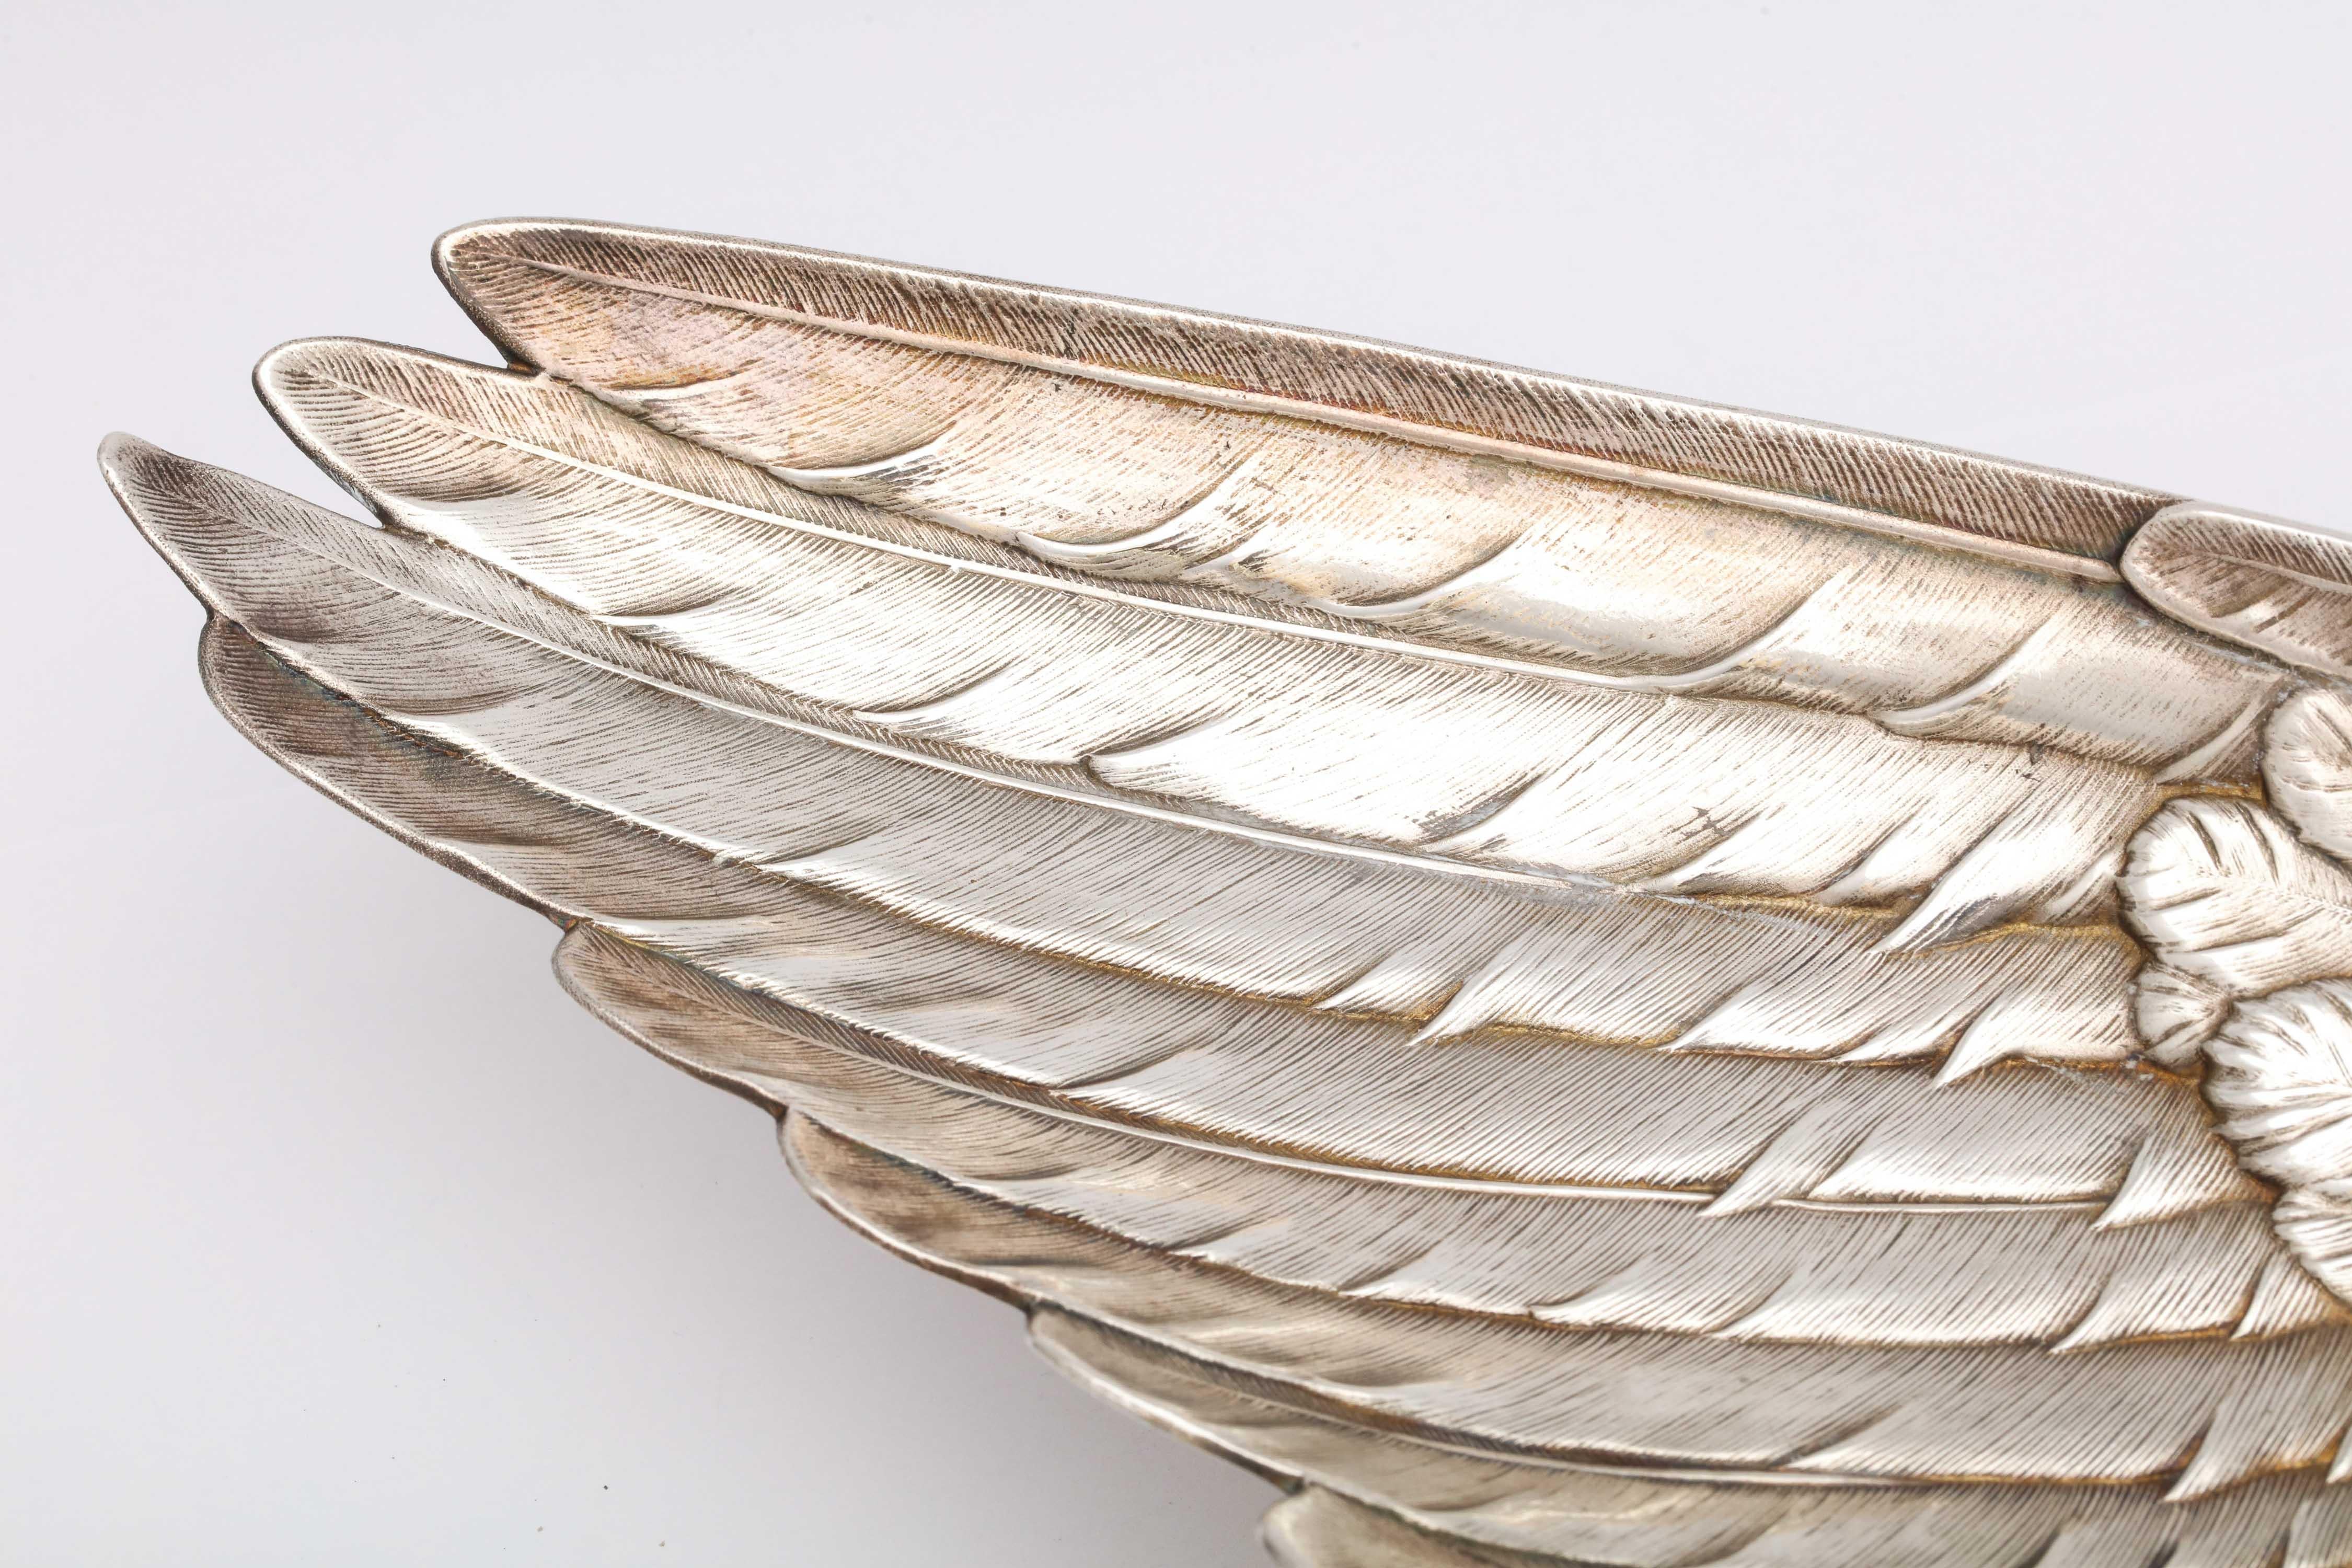 Early 20th Century Art Nouveau Whiting Sterling Silver-Gilt Platter in the Form of a Bird's Wing